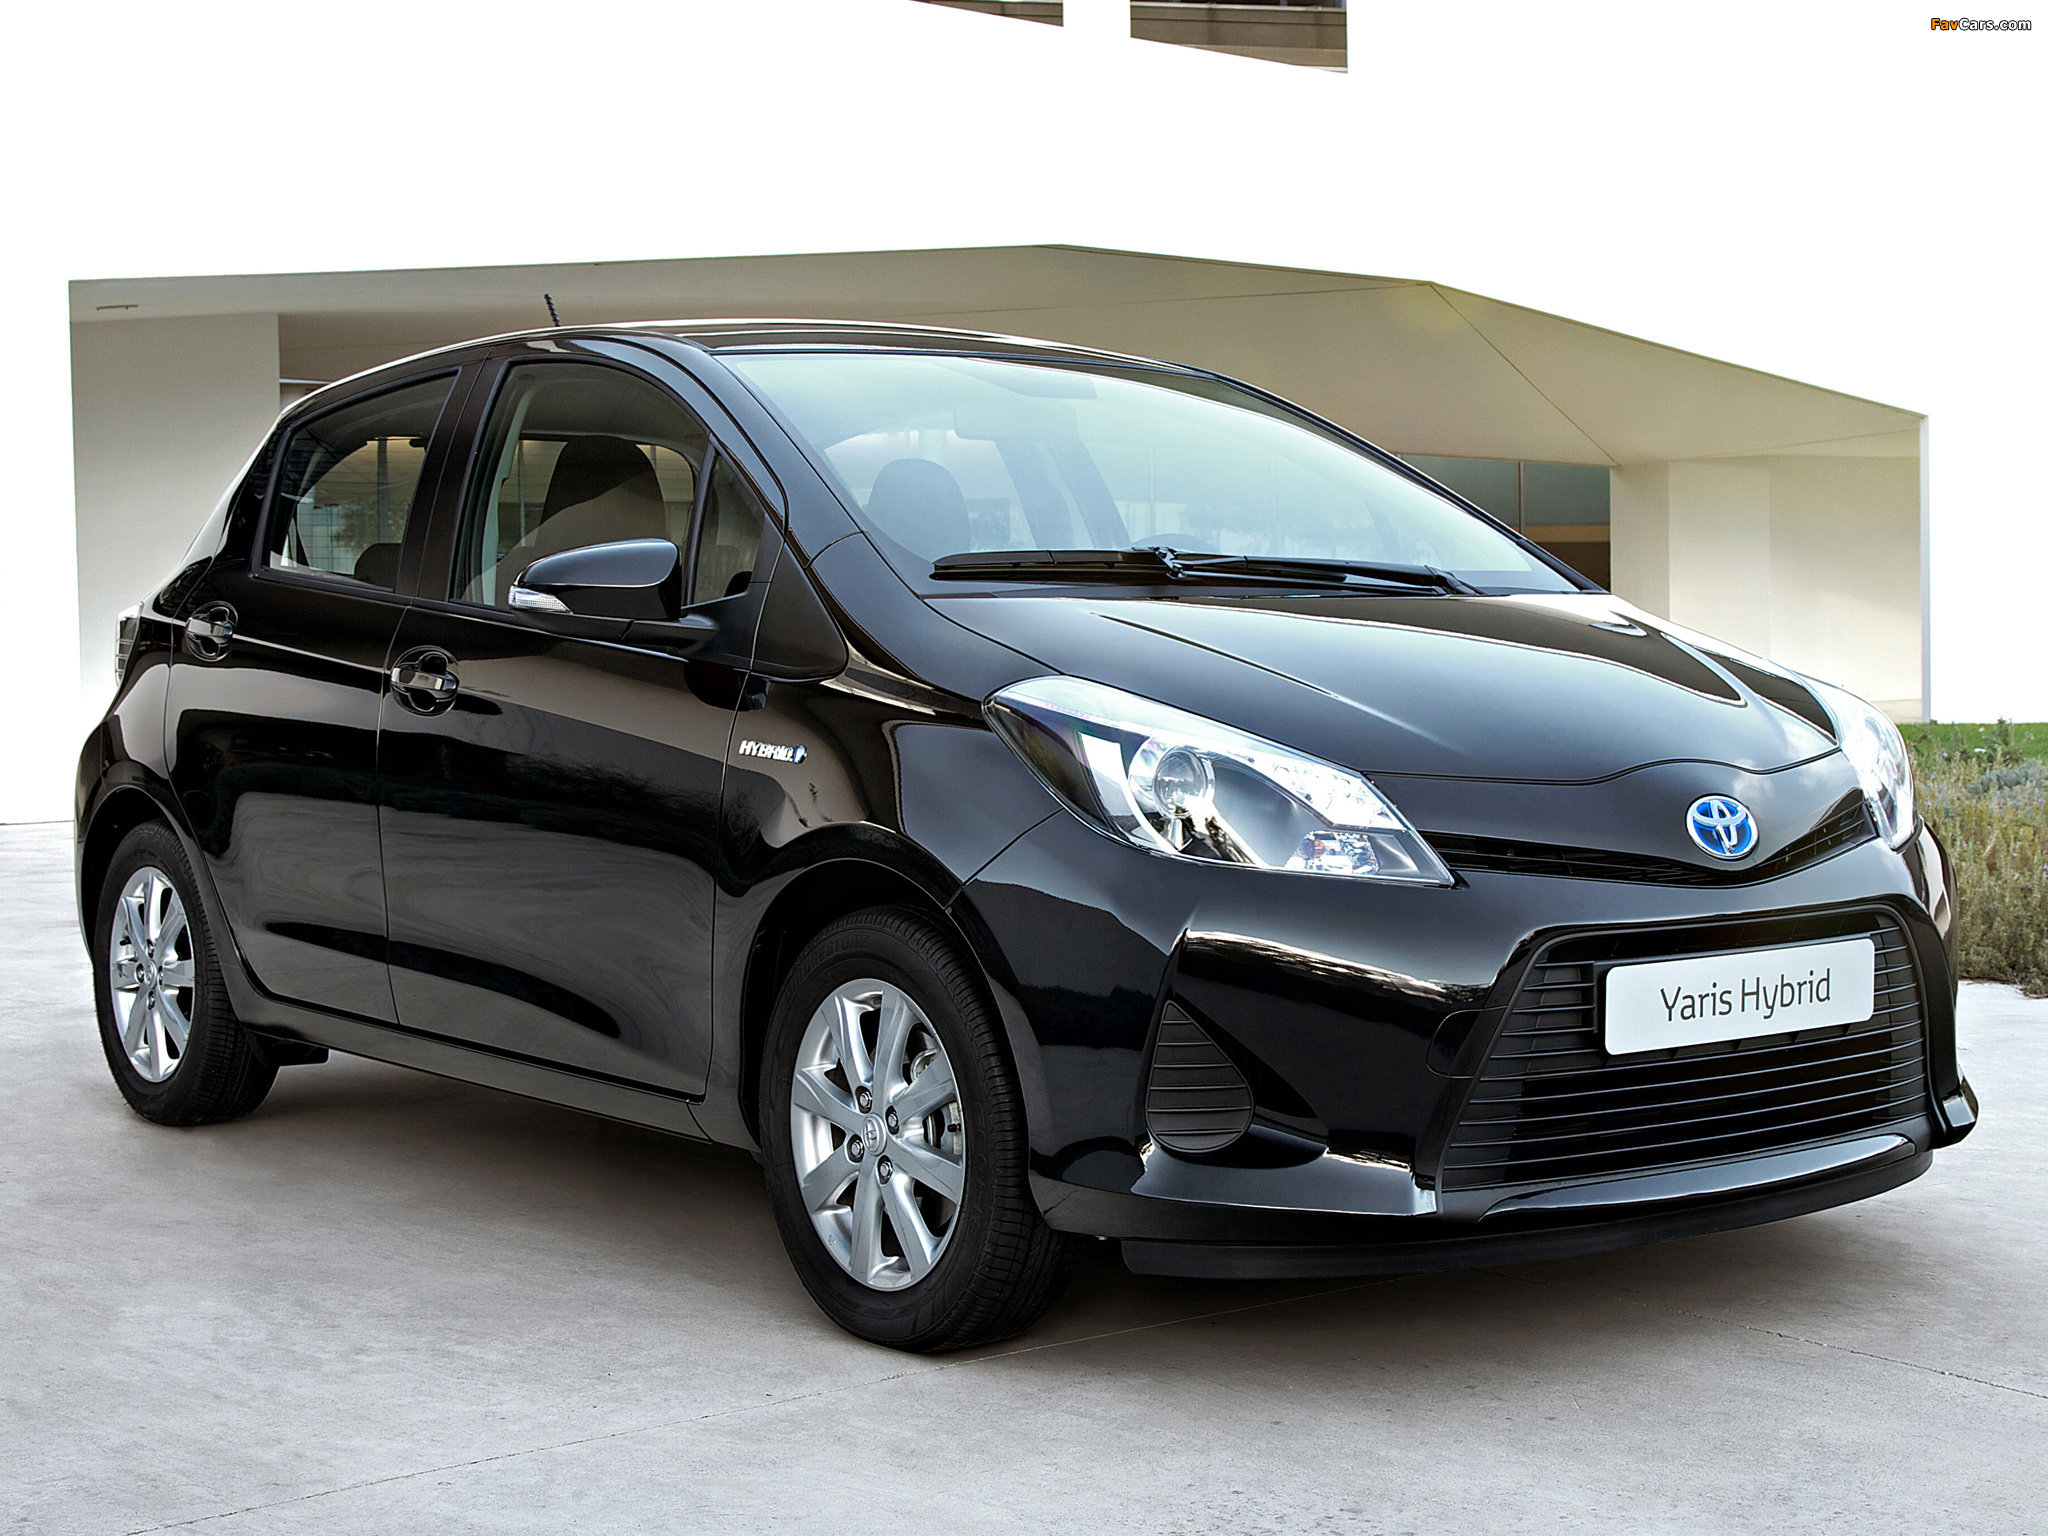 Toyota Yaris Hybrid 2012 pictures (2048 x 1536)